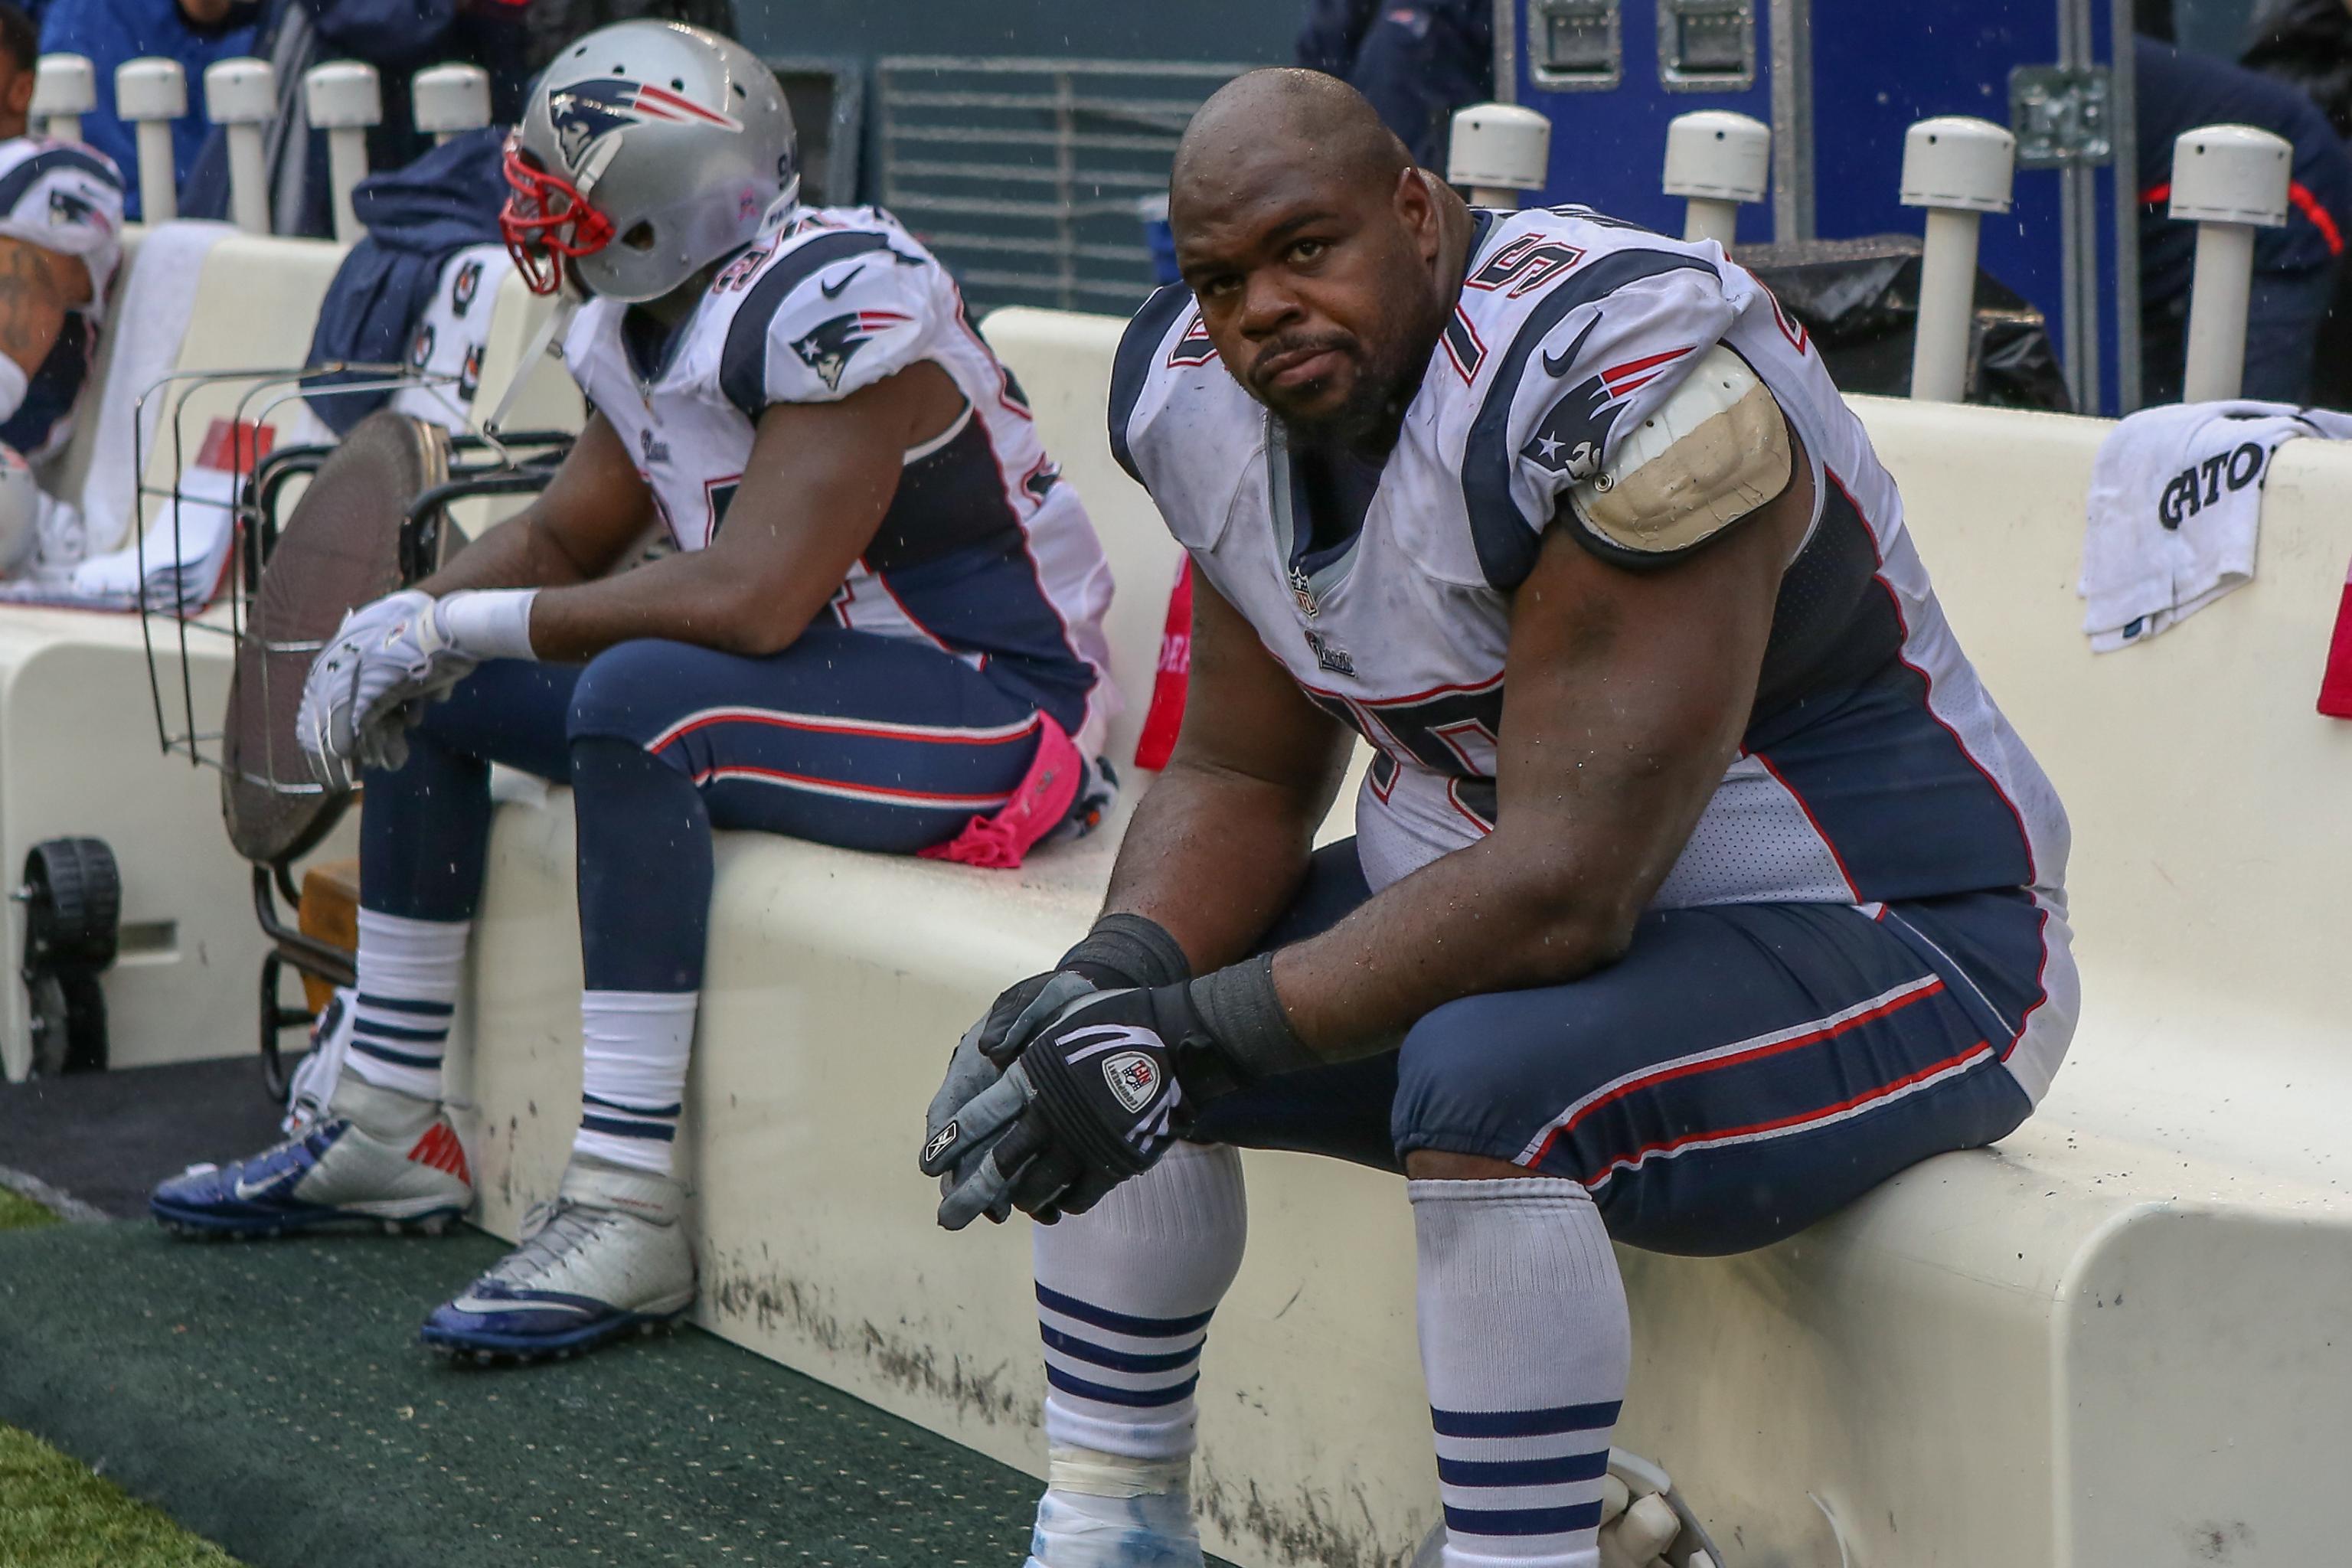 Vince Wilfork's Interception is the Best Defensive Play of the